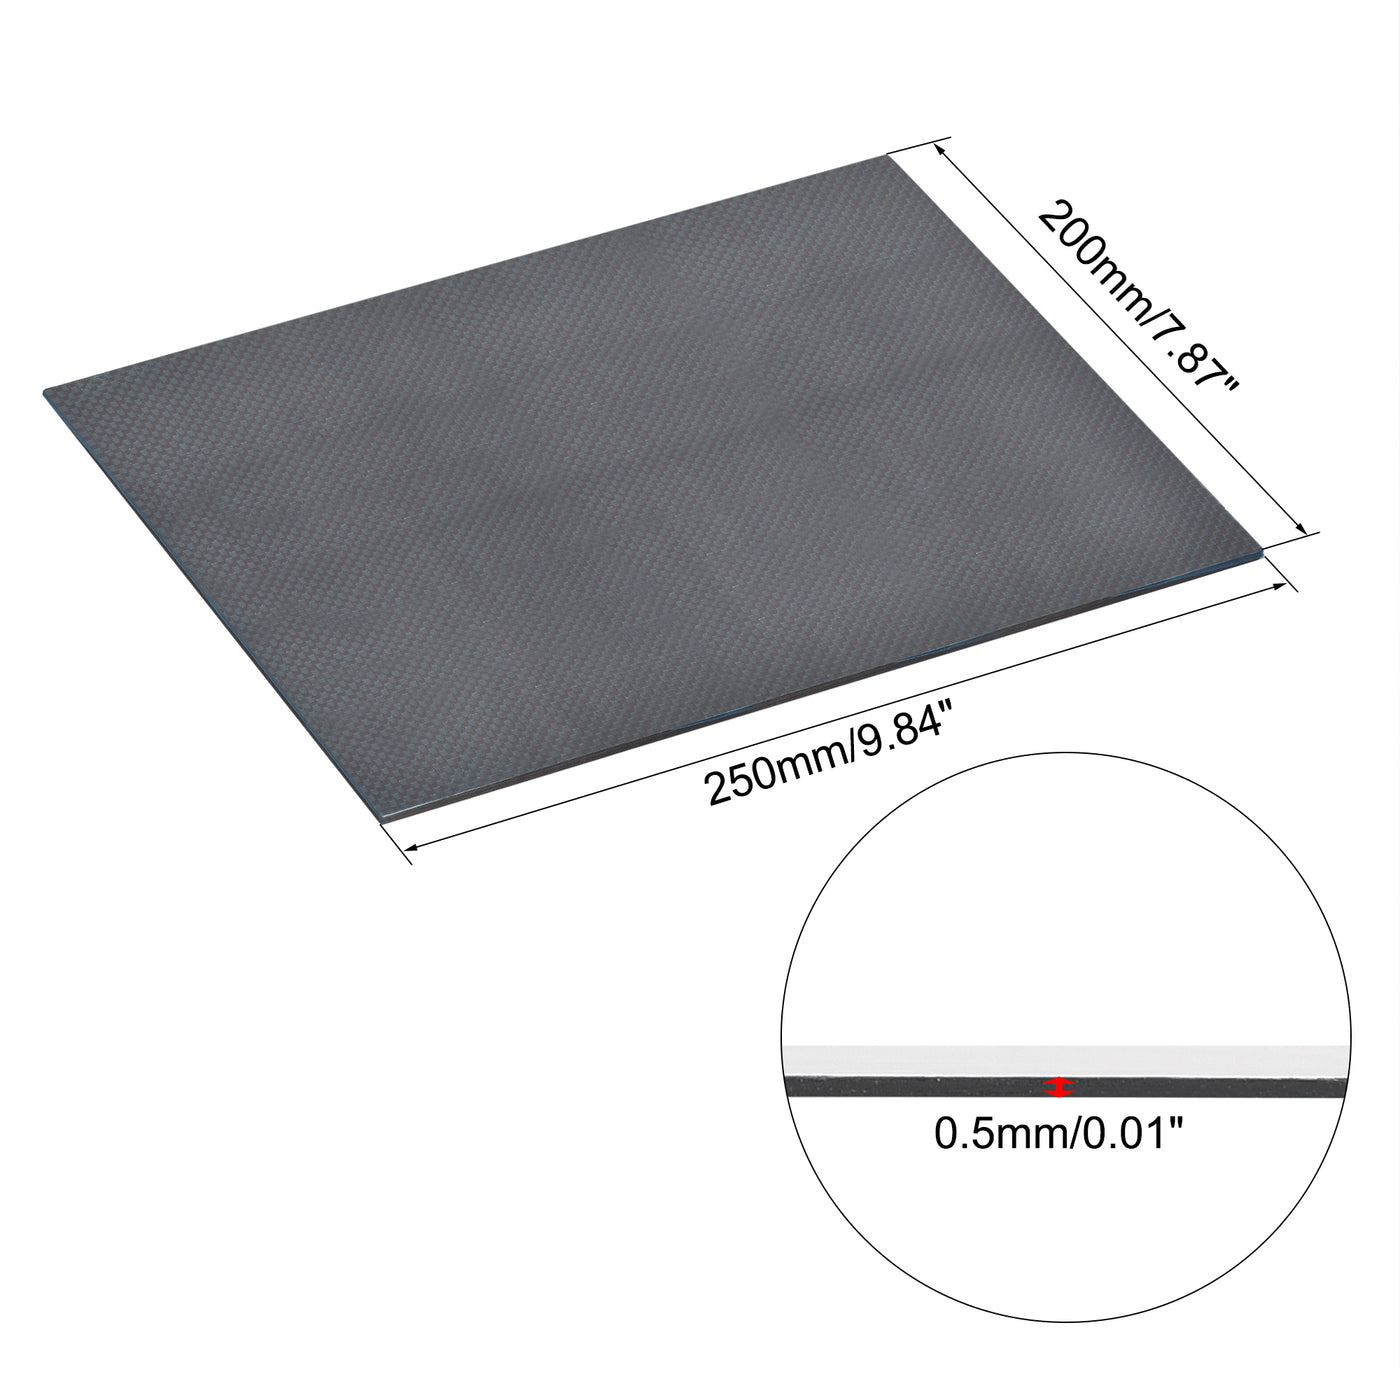 Uxcell Uxcell Carbon Fiber Plate Panel Sheets 300mm x 200mm x 0.6mm (Plain Glossy)